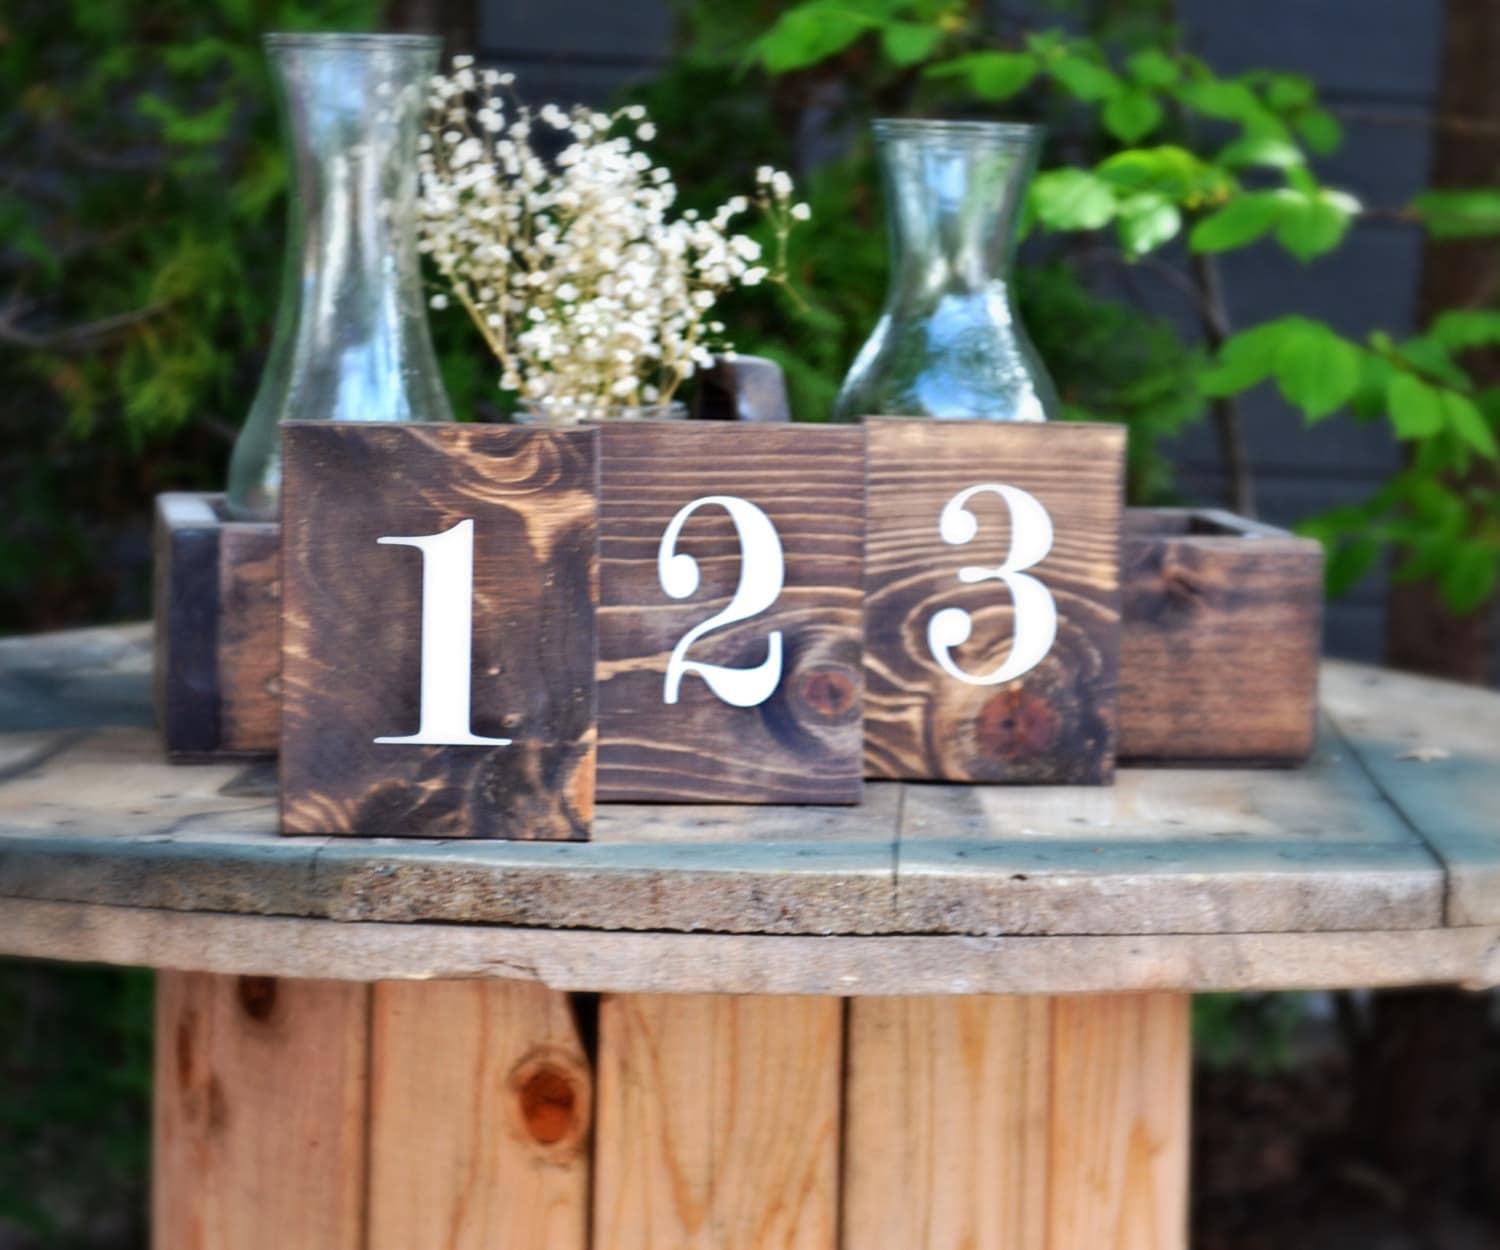 Set of 25 Rustic Double Sided Wedding Table Numbers, rustic wedding, barnwood wedding, country wedding, rustic table decor, rustic wood